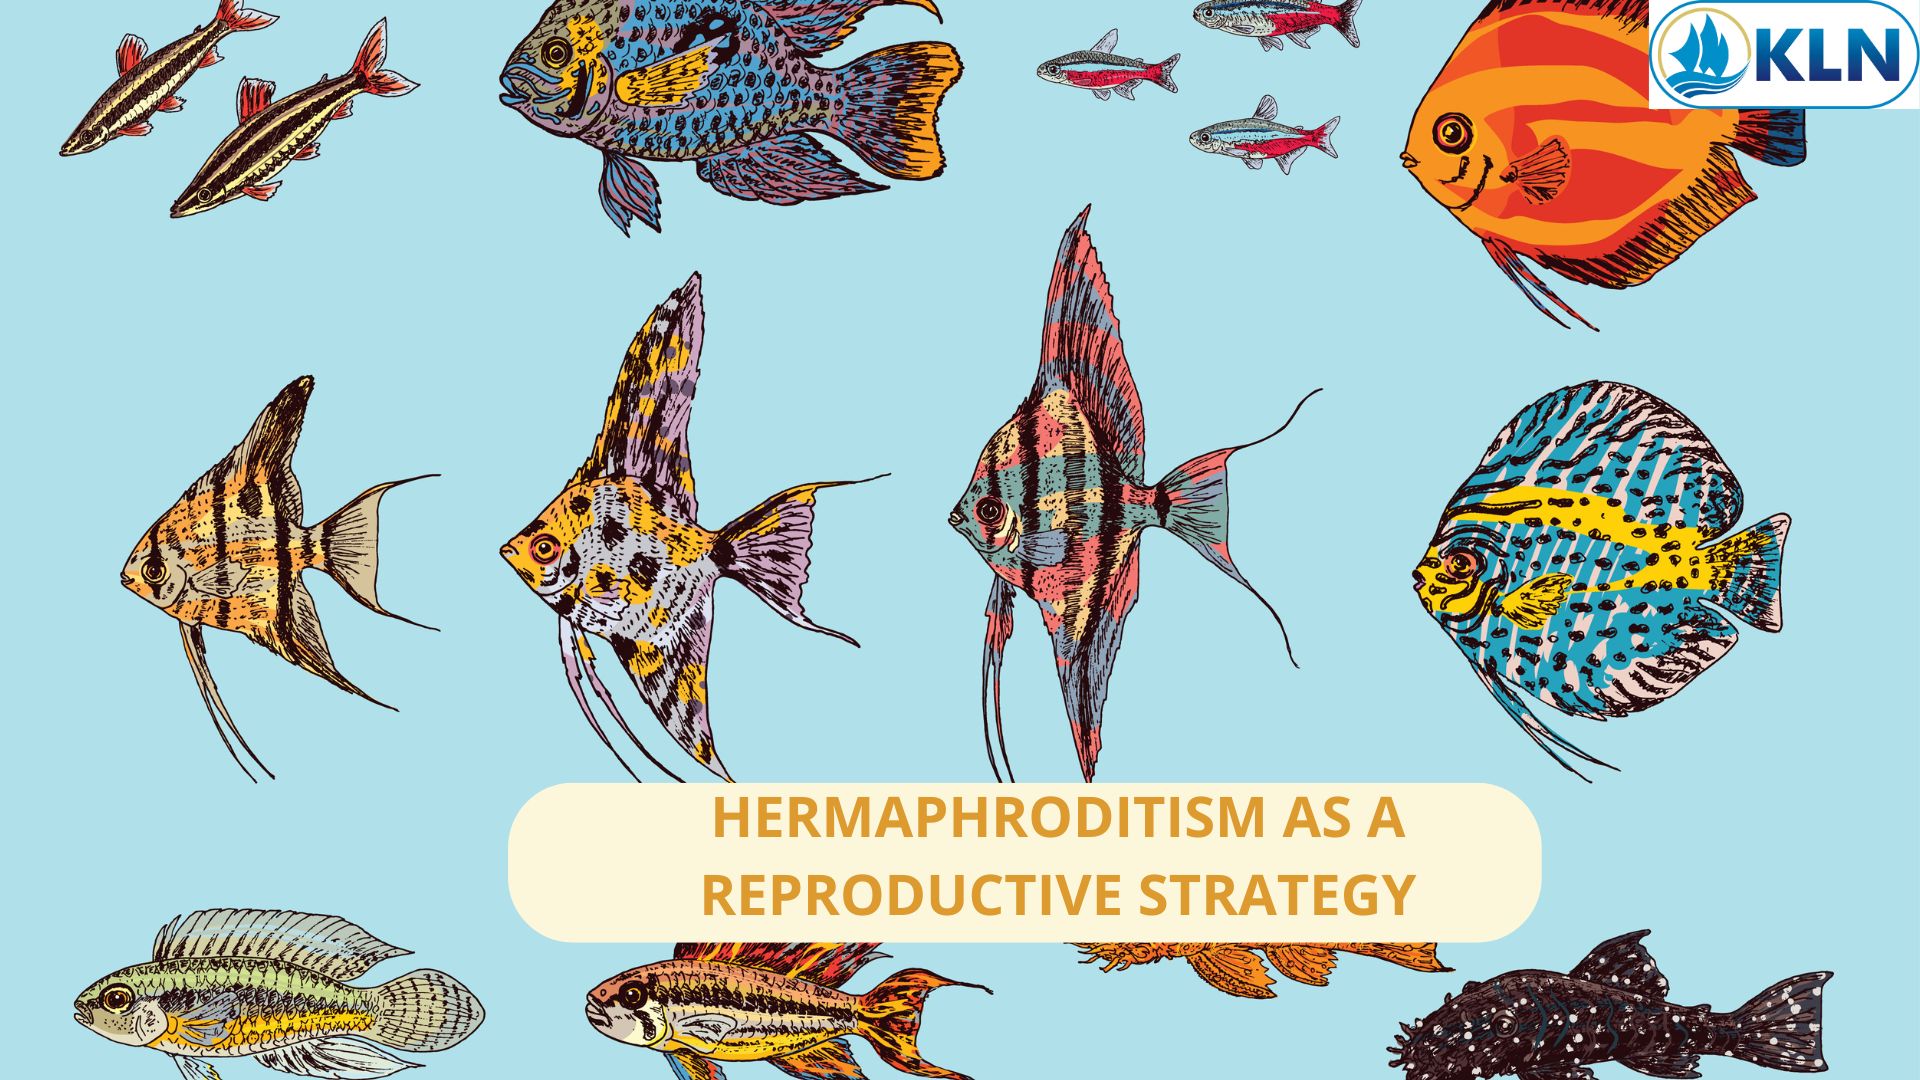 HERMAPHRODITISM AS A REPRODUCTIVE STRATEGY 